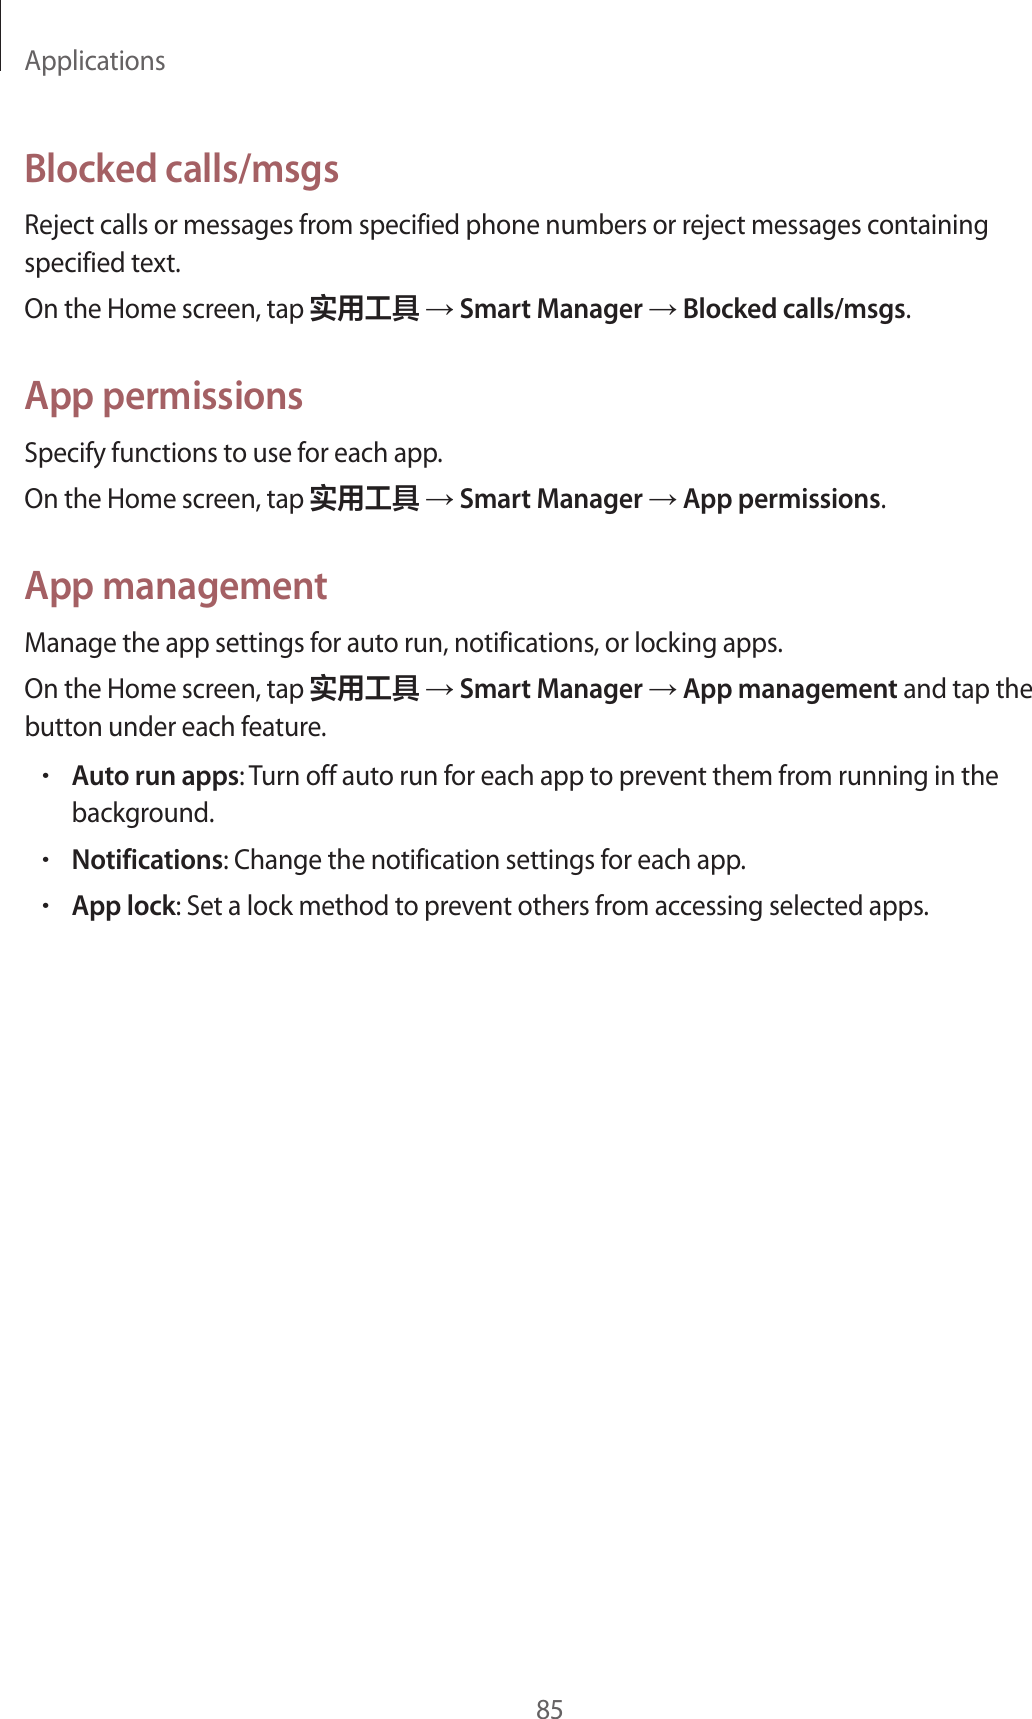 Applications85Blocked calls/msgsReject calls or messages from specified phone numbers or reject messages containing specified text.On the Home screen, tap 实用工具 → Smart Manager → Blocked calls/msgs.App permissionsSpecify functions to use for each app.On the Home screen, tap 实用工具 → Smart Manager → App permissions.App managementManage the app settings for auto run, notifications, or locking apps.On the Home screen, tap 实用工具 → Smart Manager → App management and tap the button under each feature.•Auto run apps: Turn off auto run for each app to prevent them from running in the background.•Notifications: Change the notification settings for each app.•App lock: Set a lock method to prevent others from accessing selected apps.